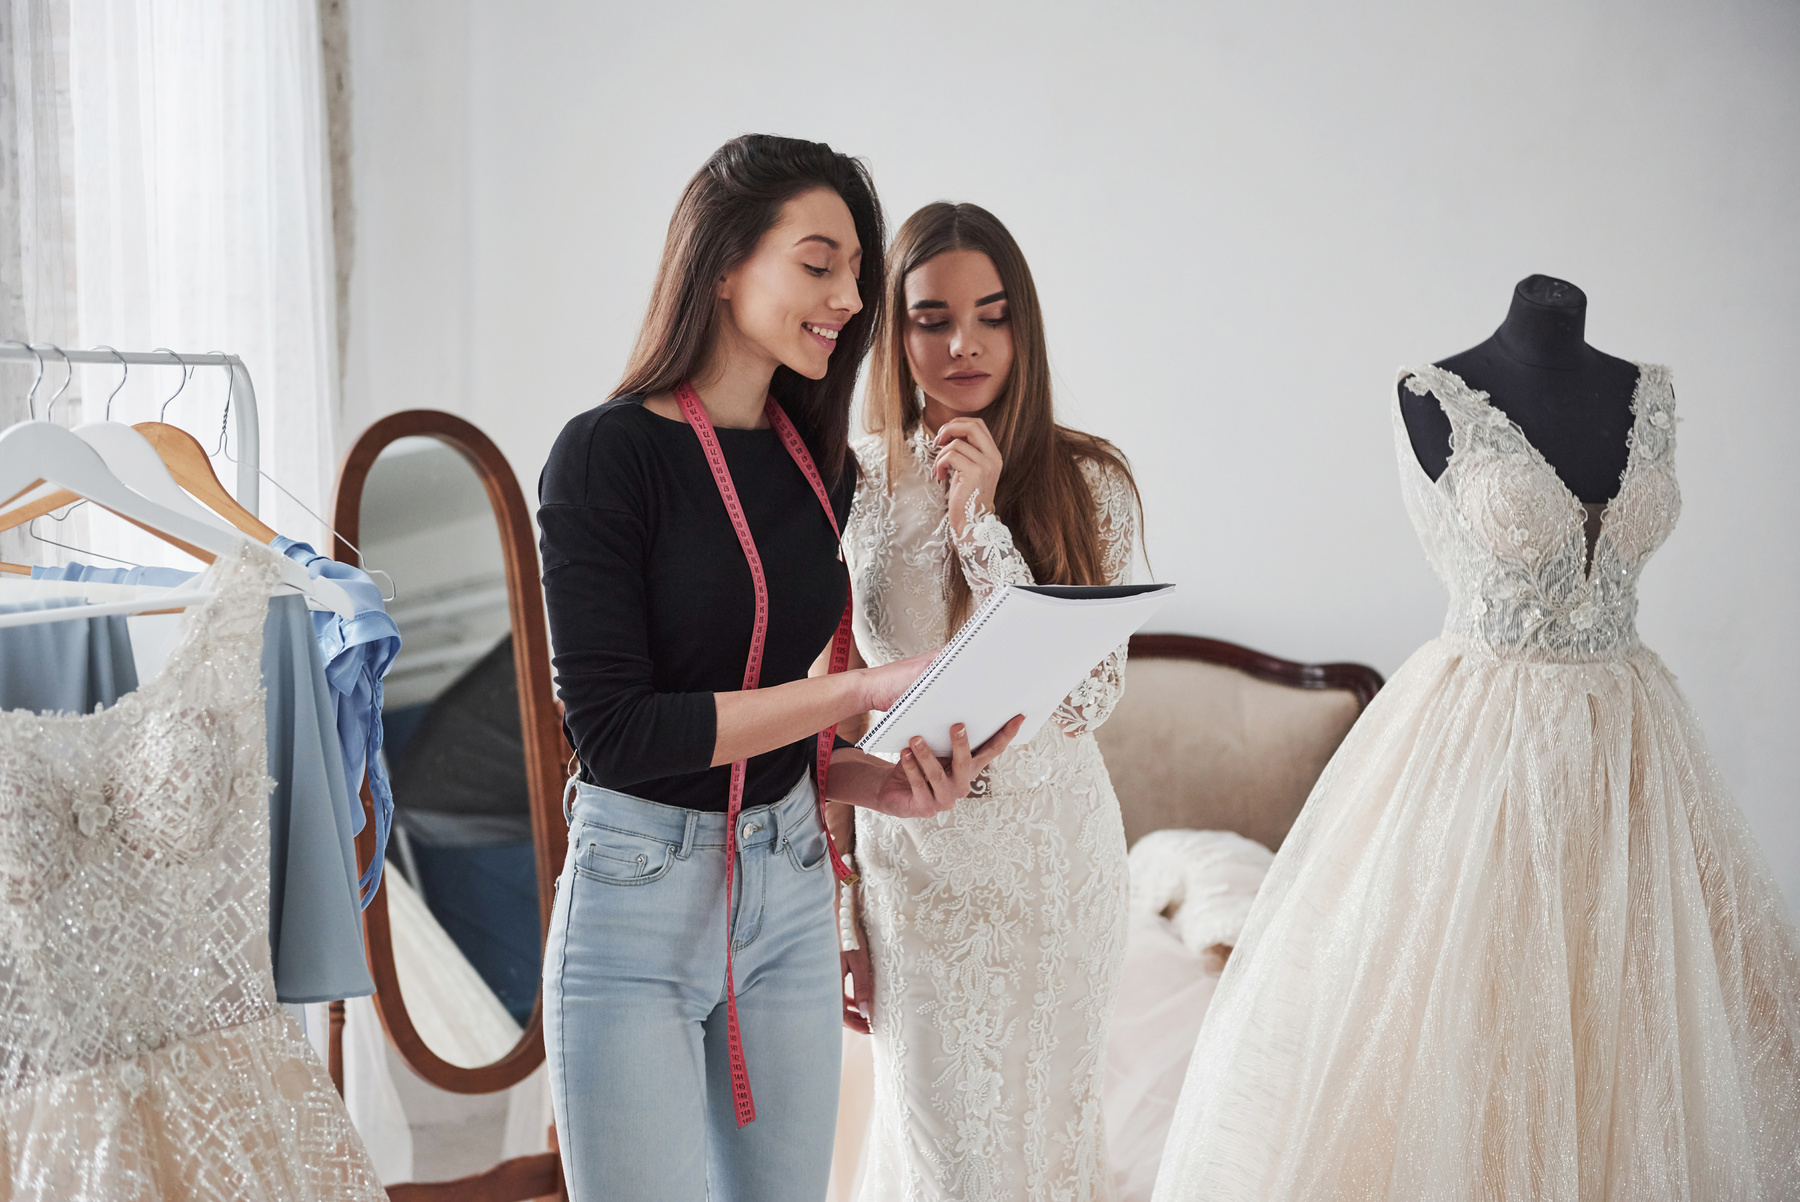 Stylist Takes an Alterations on Wedding Dress